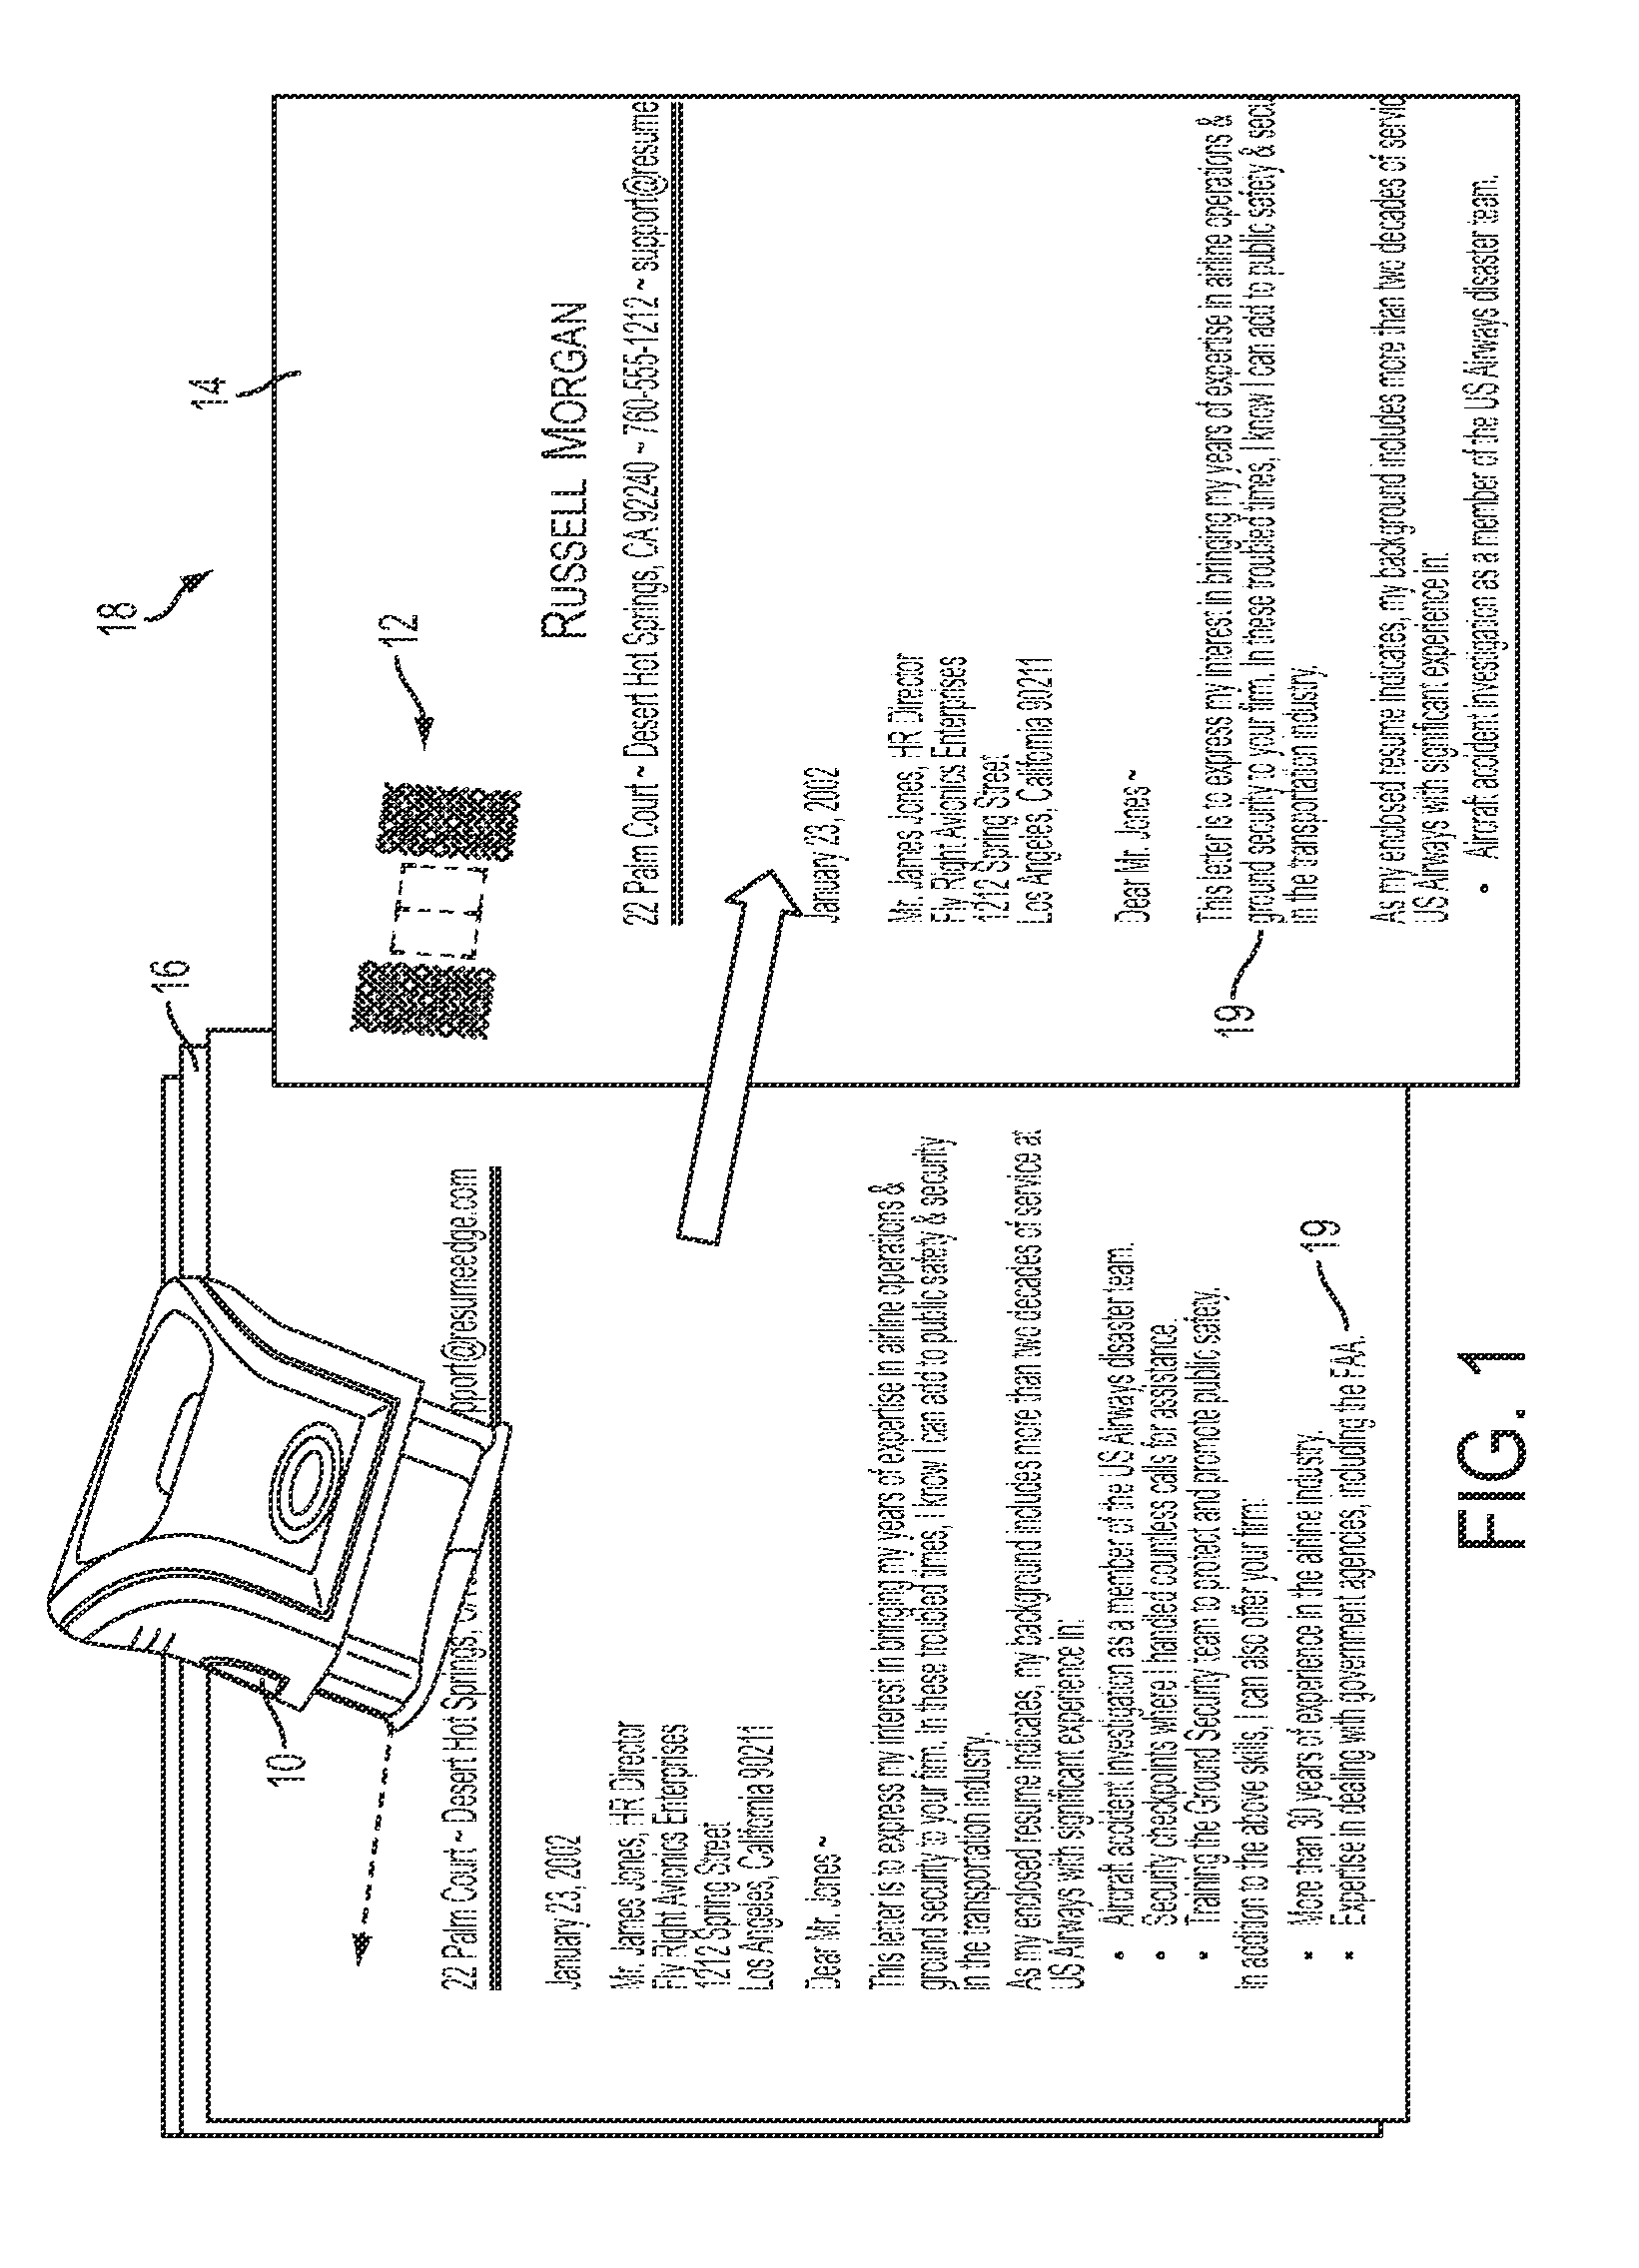 Method for one-step document categorization and separation using stamped machine recognizable patterns